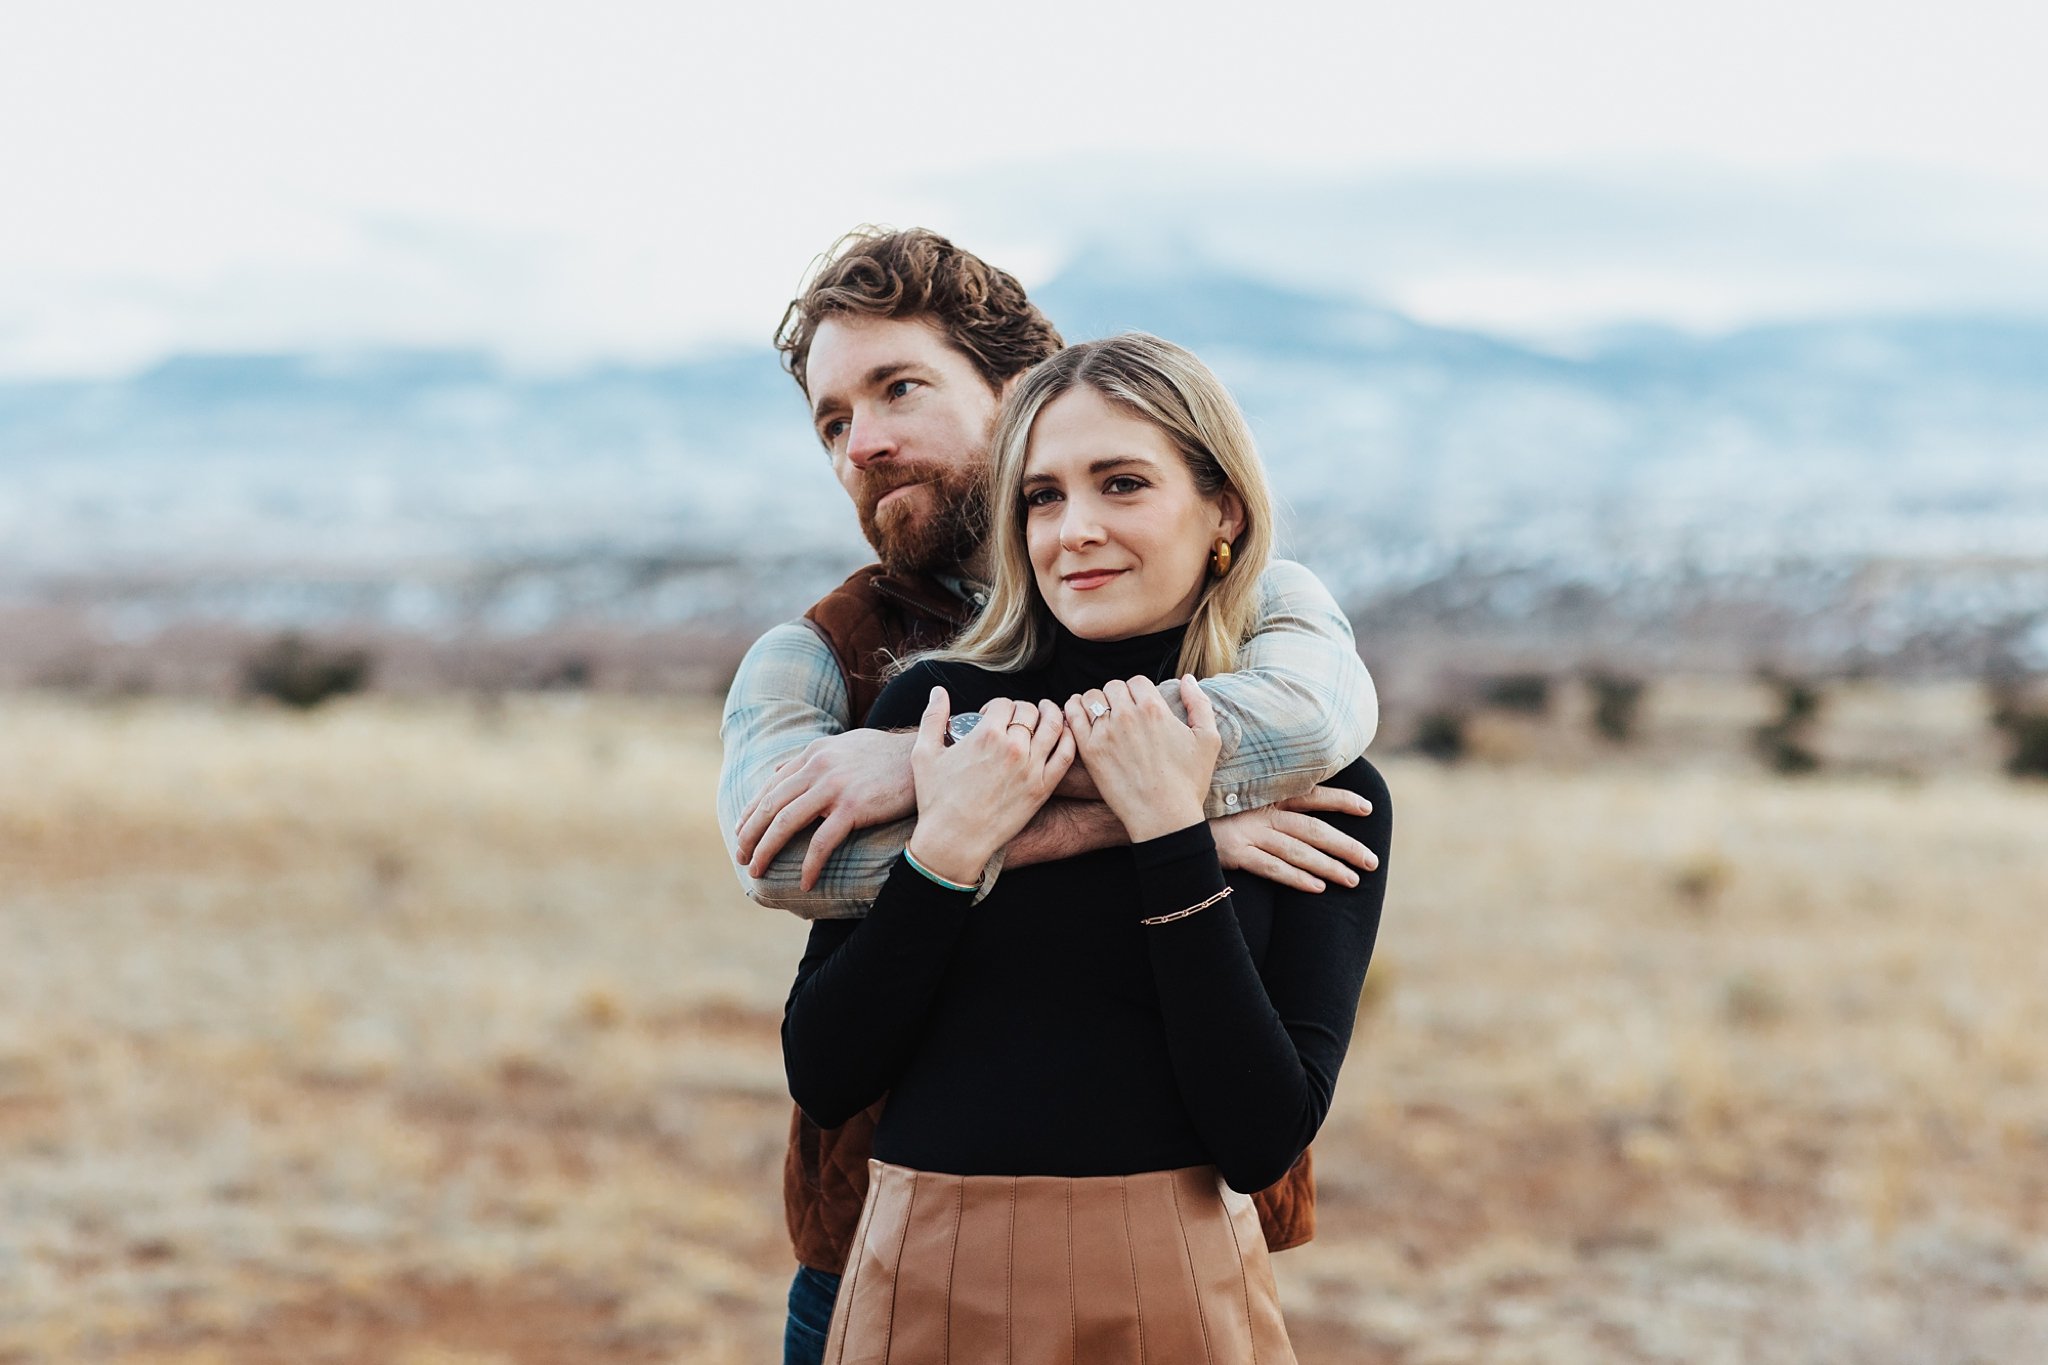 Alicia+lucia+photography+-+albuquerque+wedding+photographer+-+santa+fe+wedding+photography+-+new+mexico+wedding+photographer+-+new+mexico+wedding+-+southwest+engagement+-+ghost+ranch+engagement+-+ghost+ranch+wedding_0083.jpg